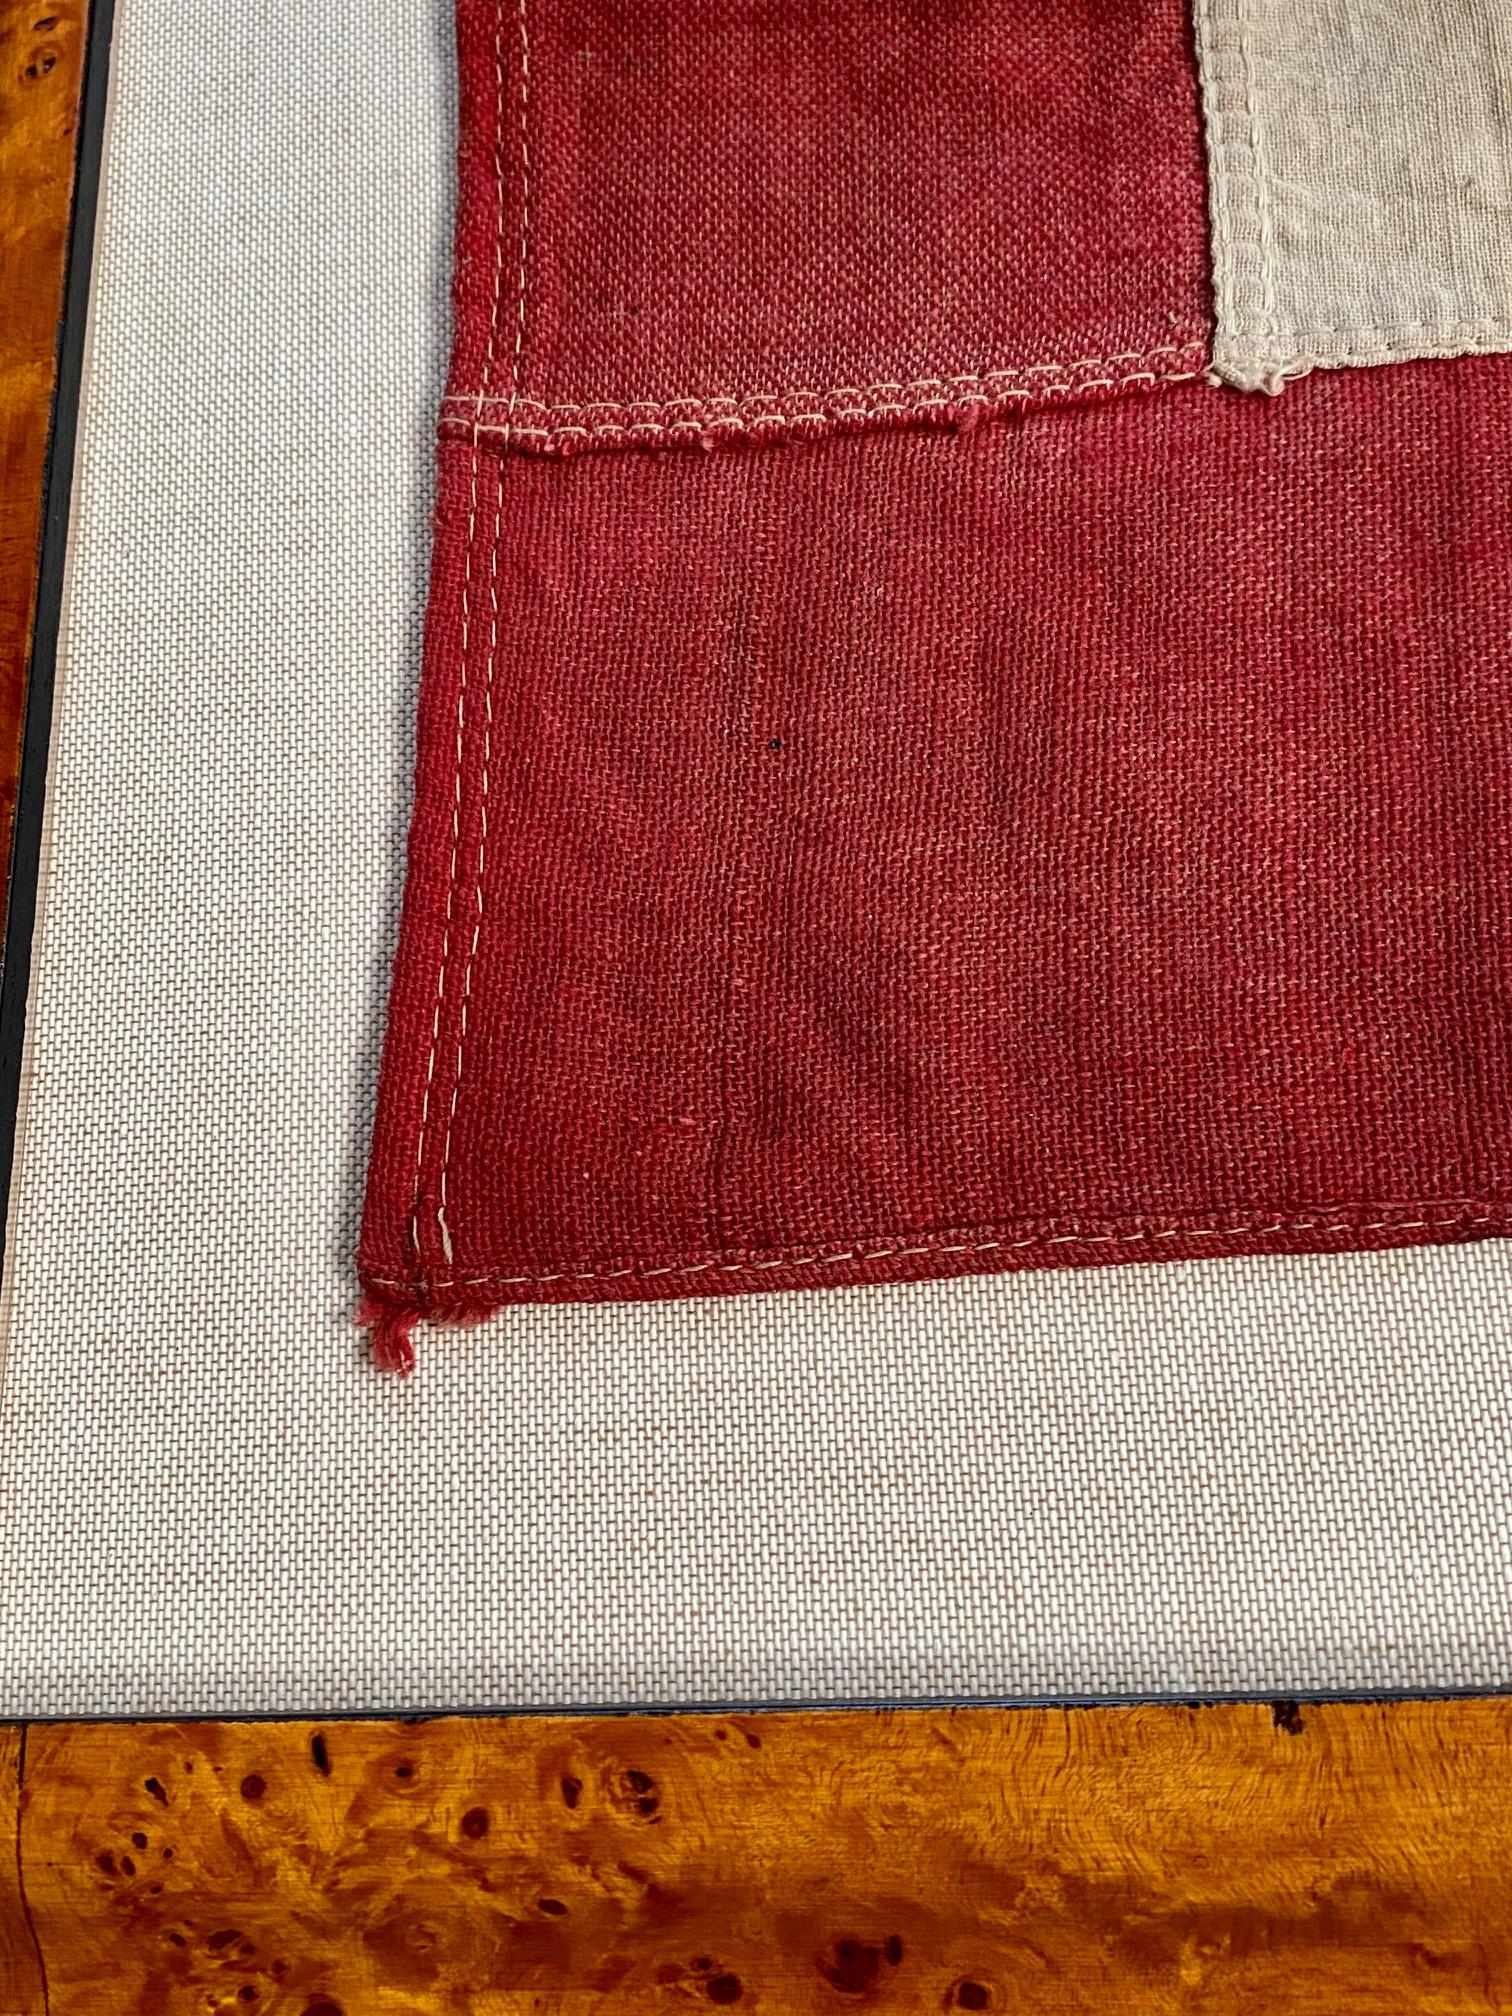 Antique Historic American Blue Star Flag, circa 1917, a World War I flag honoring a family member in service. The flag is handcrafted of linen. It is structurally sound and in very good condition, but does show its wonderful age in subtle fading and